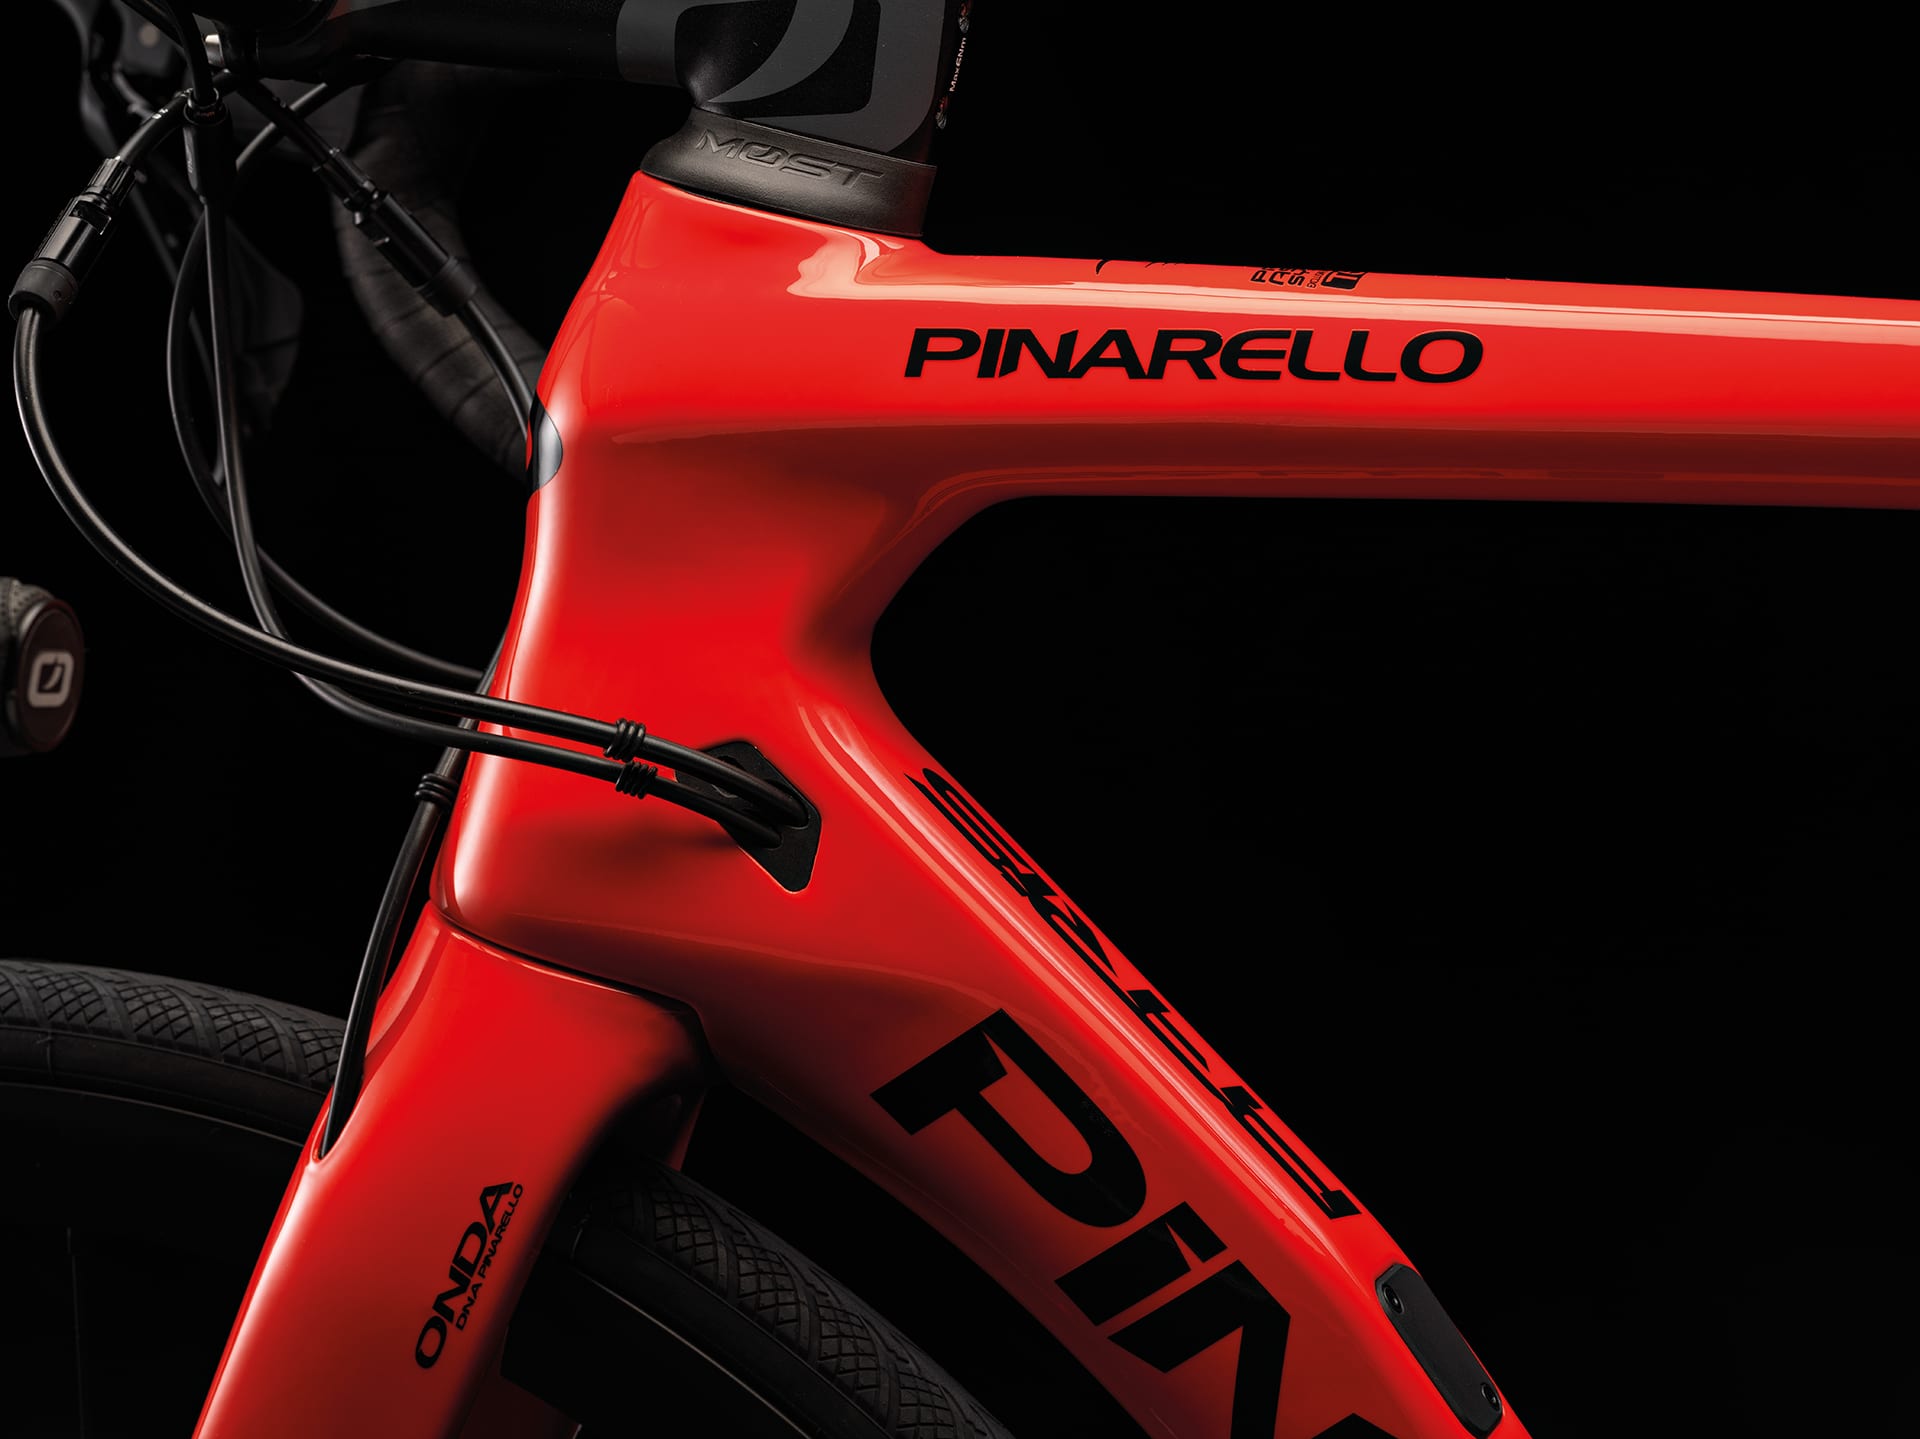 A First Look at the New 2021 Pinarello Prince